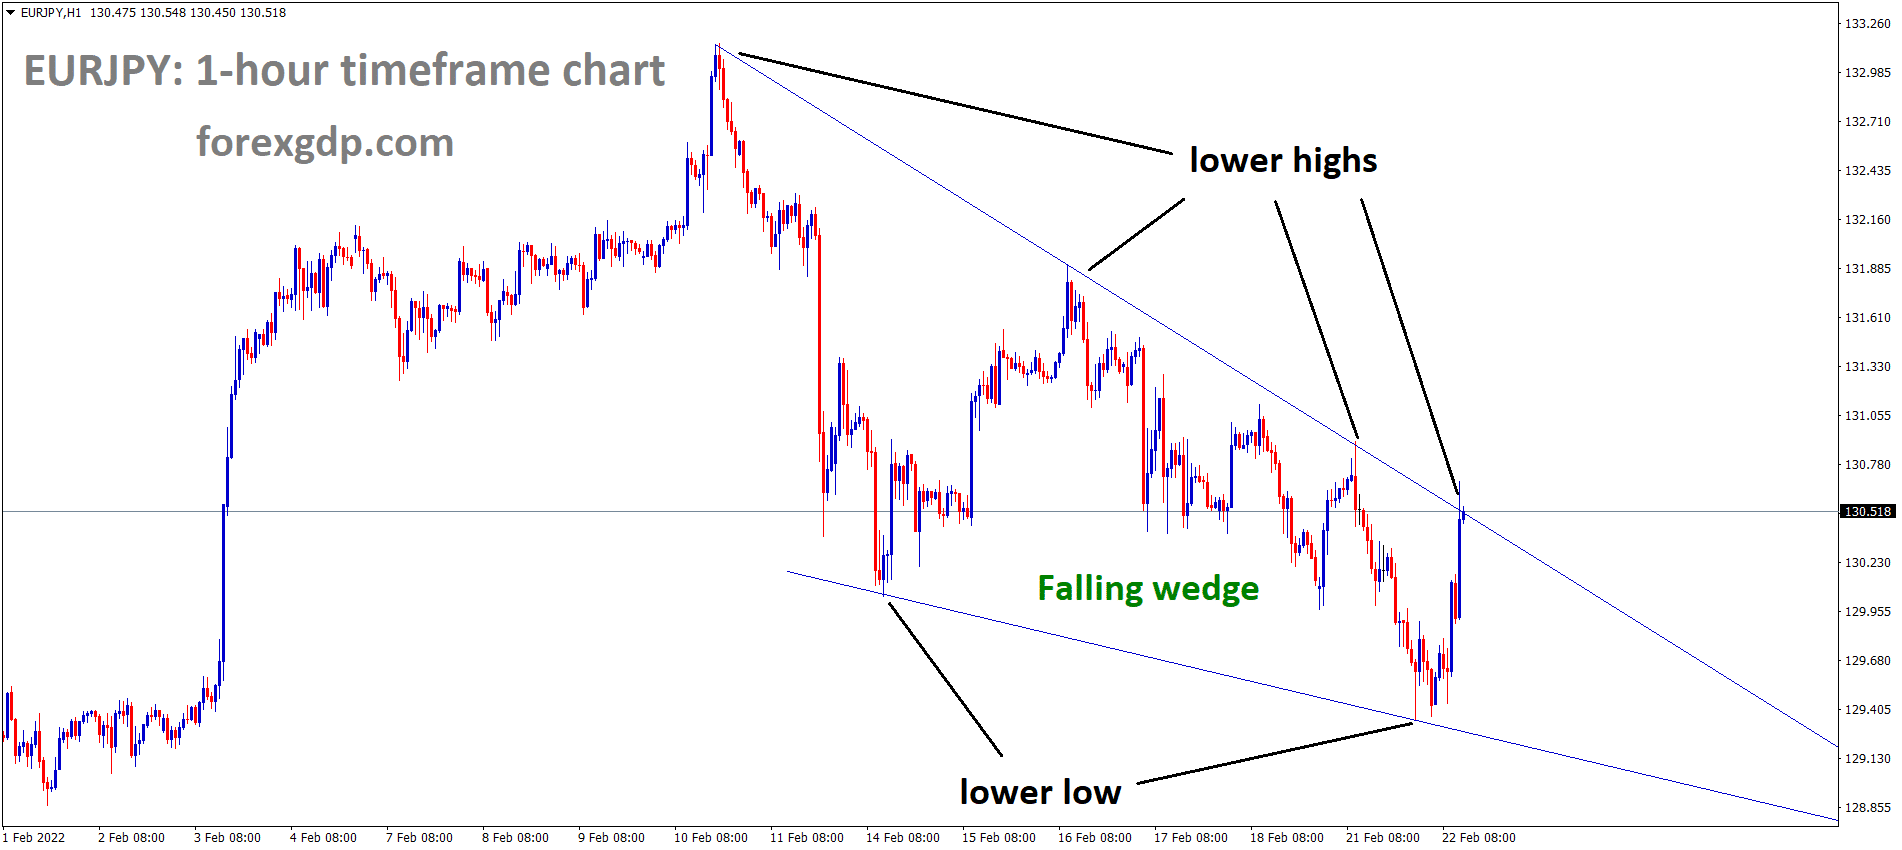 EURJPY is moving in the Falling wedge pattern and the market has reached the lower high area of the pattern